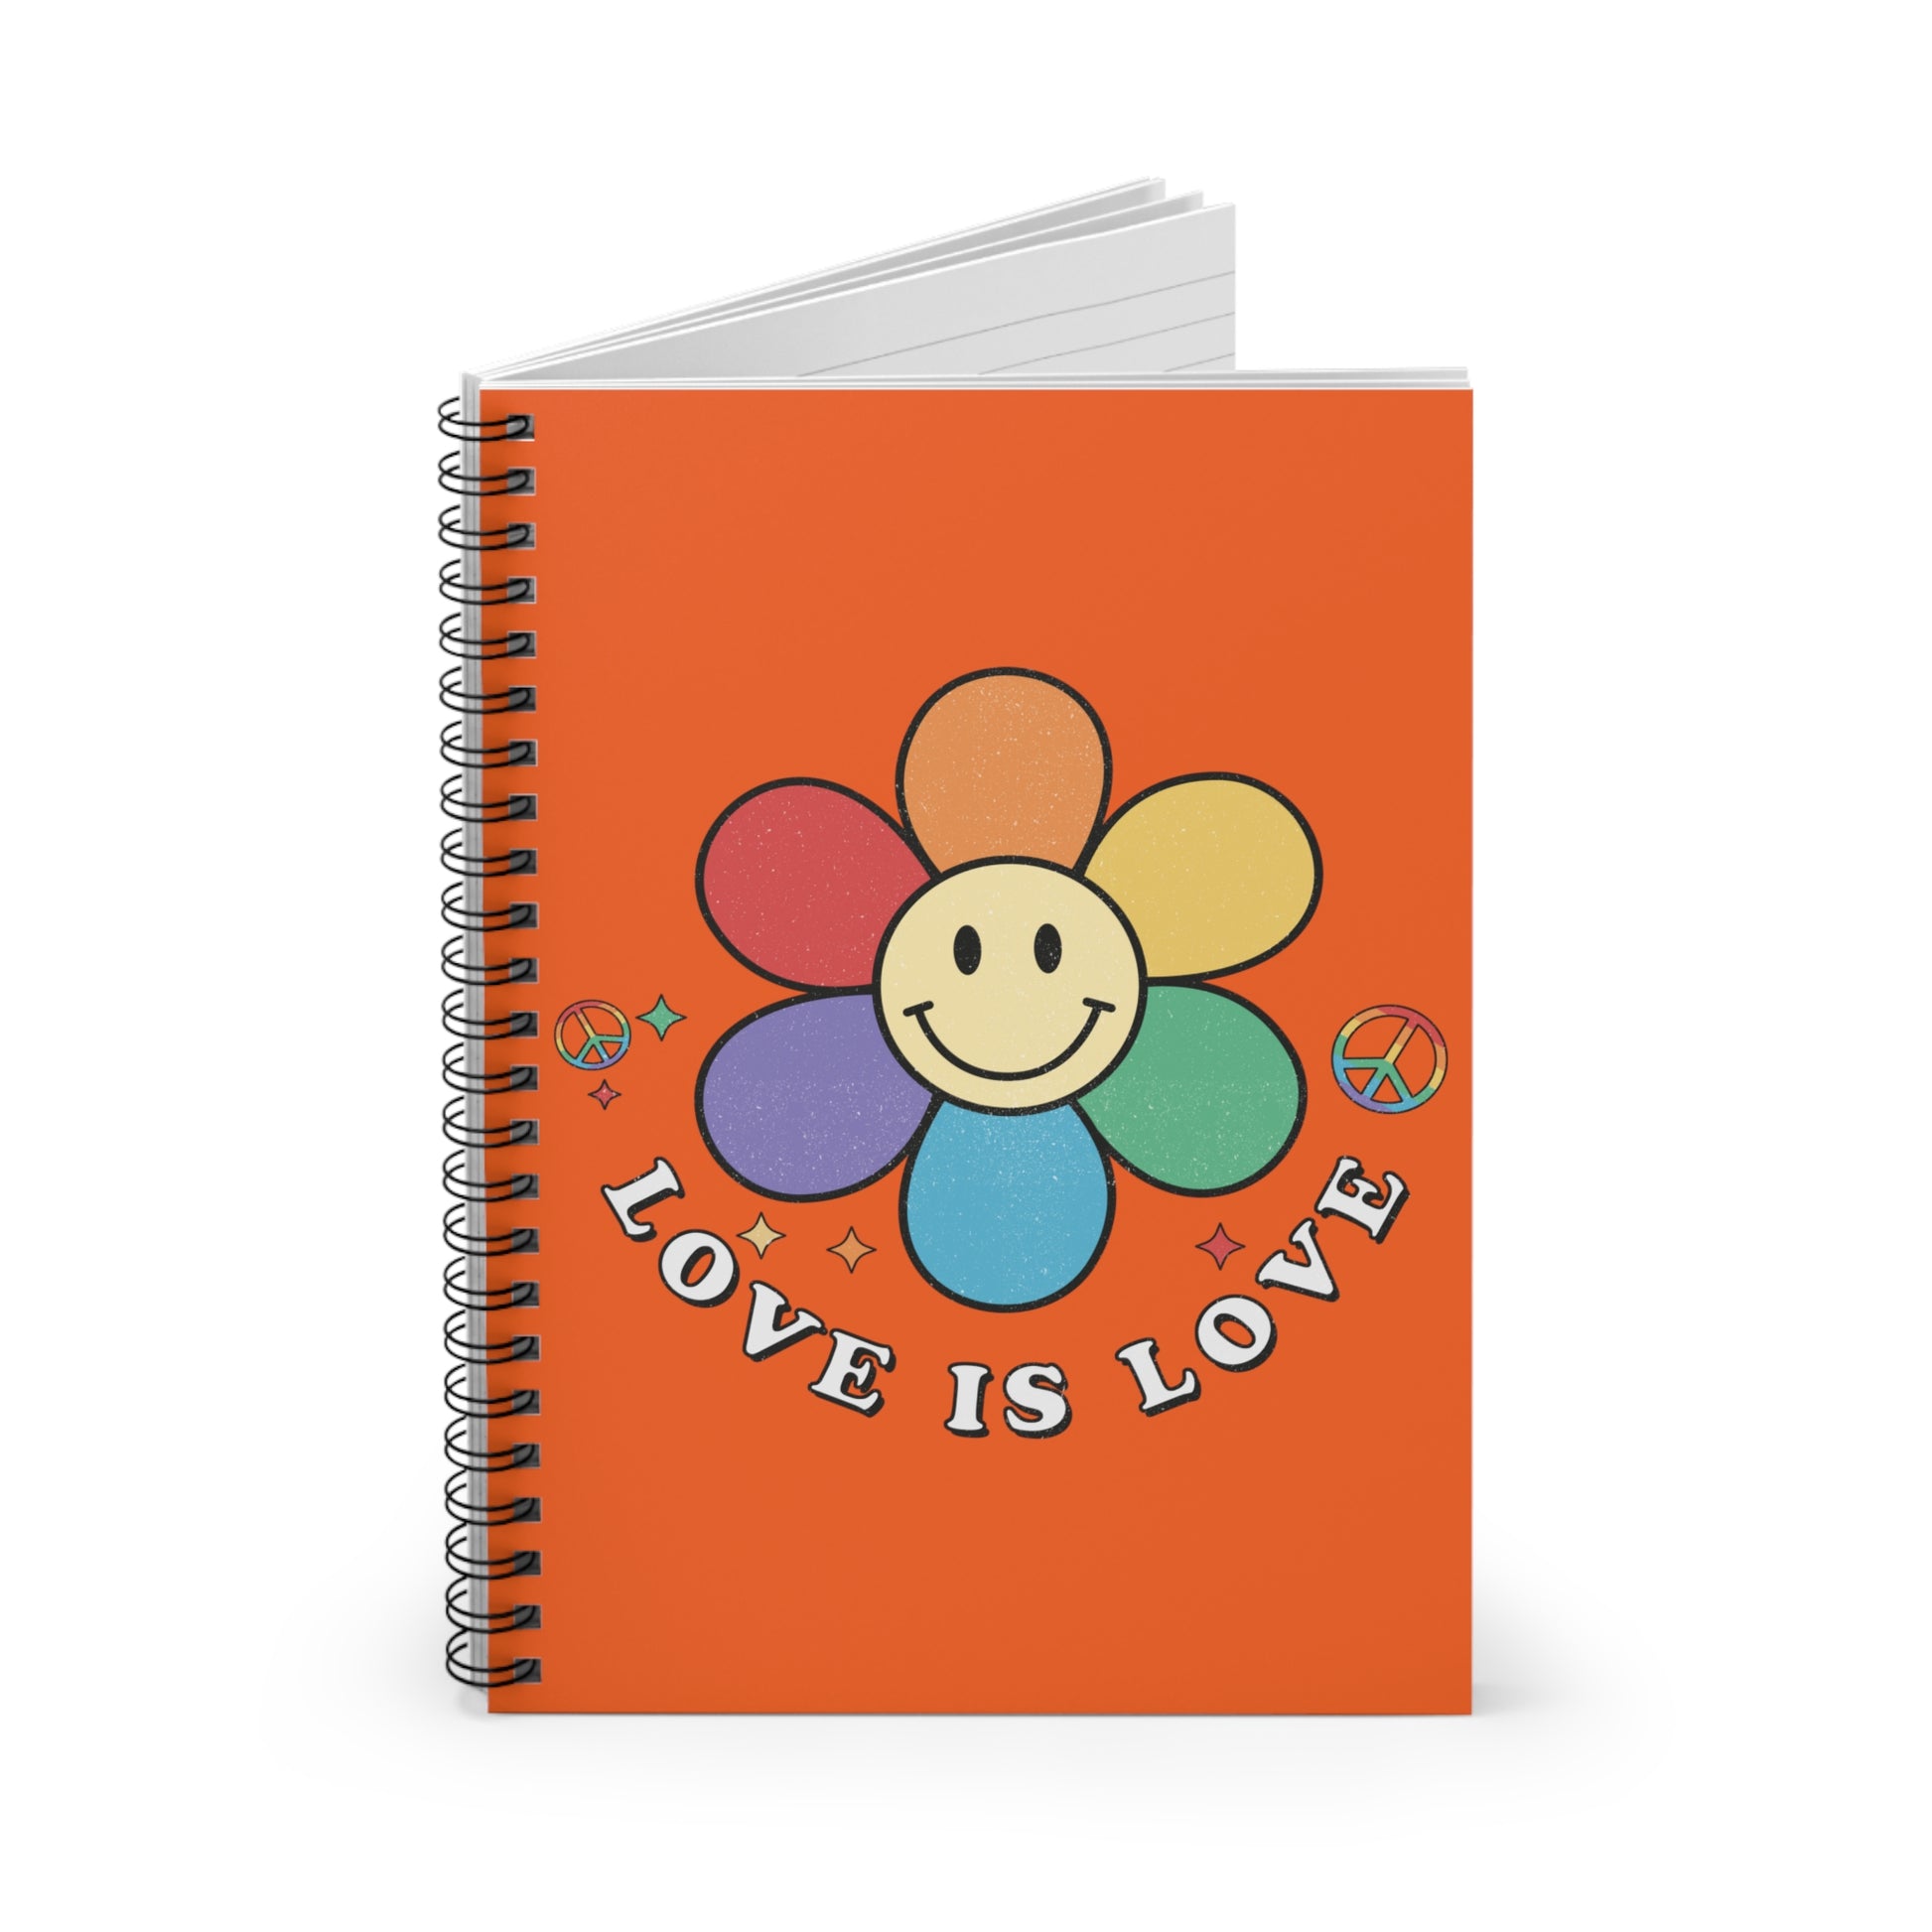 Love is Love: Spiral Notebook - Log Books - Journals - Diaries - and More Custom Printed by TheGlassyLass